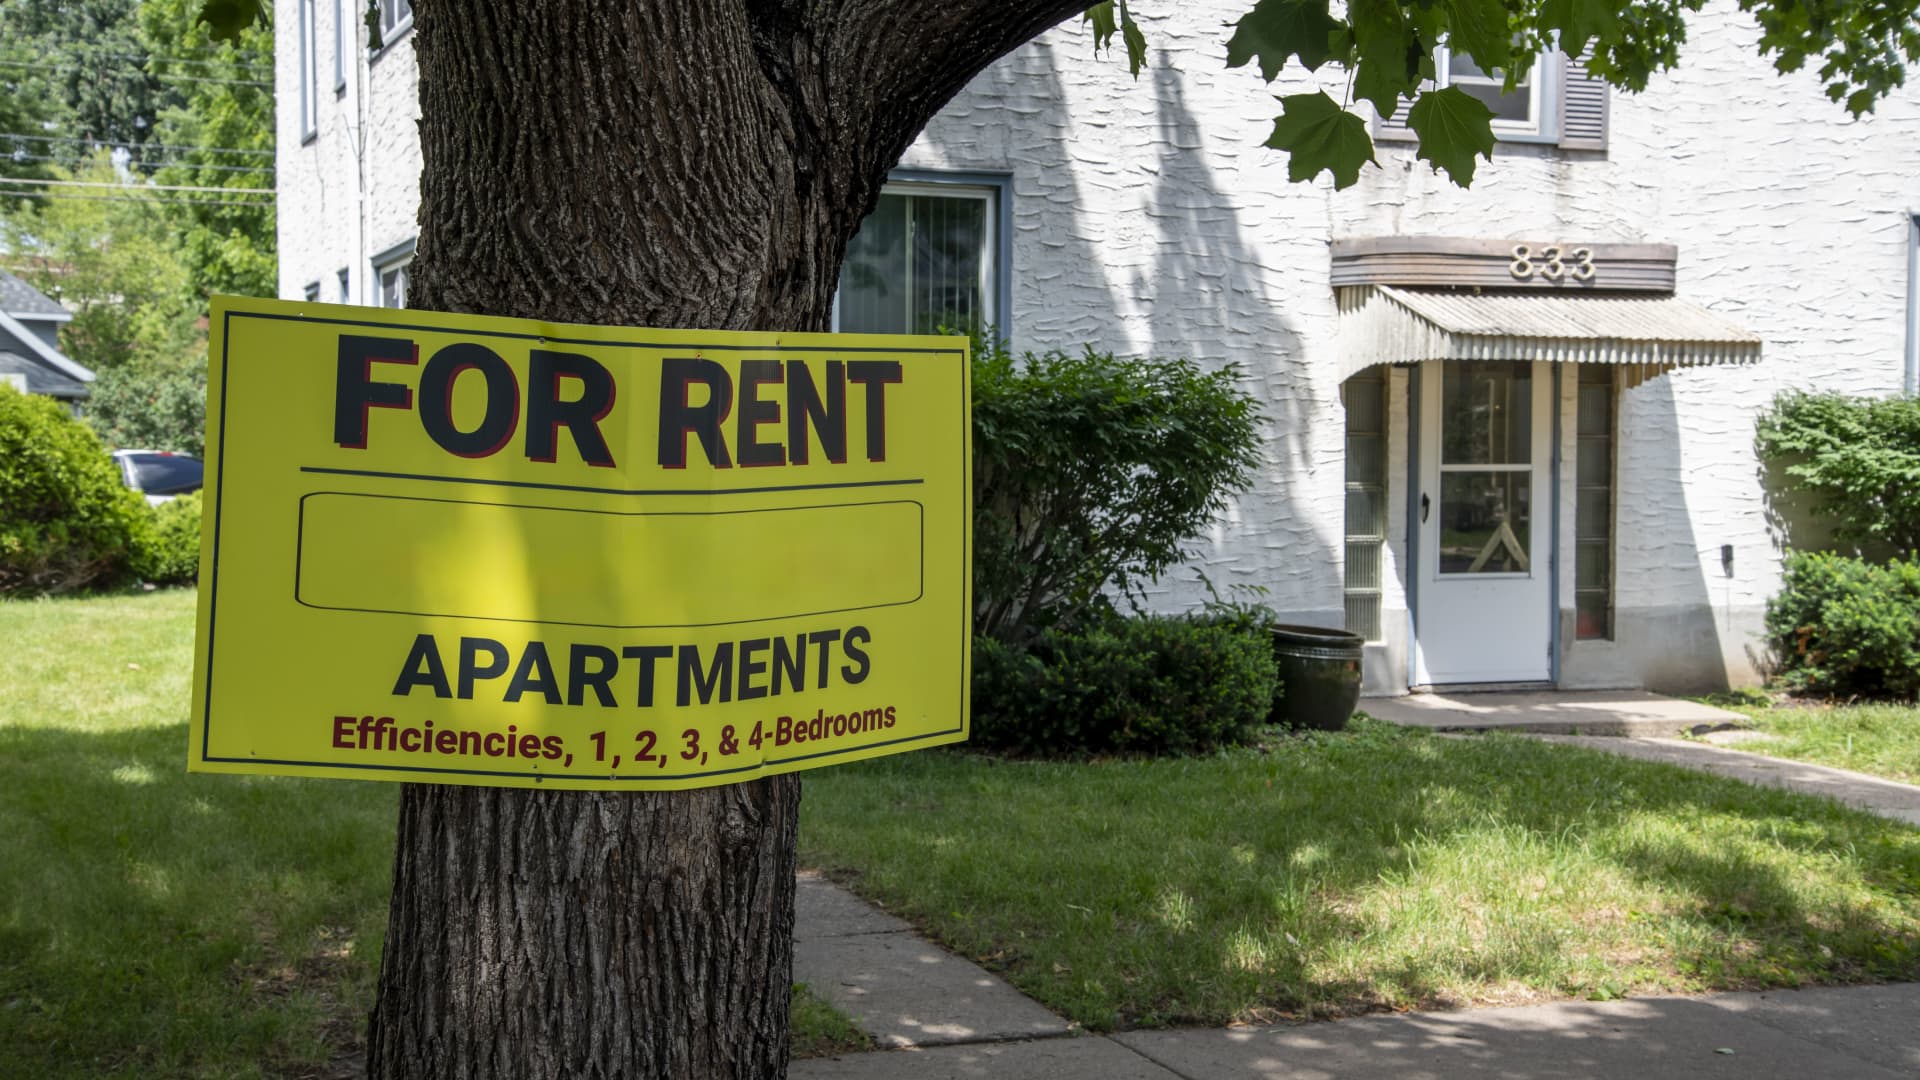  Here's where rents are rising — and where they're falling 